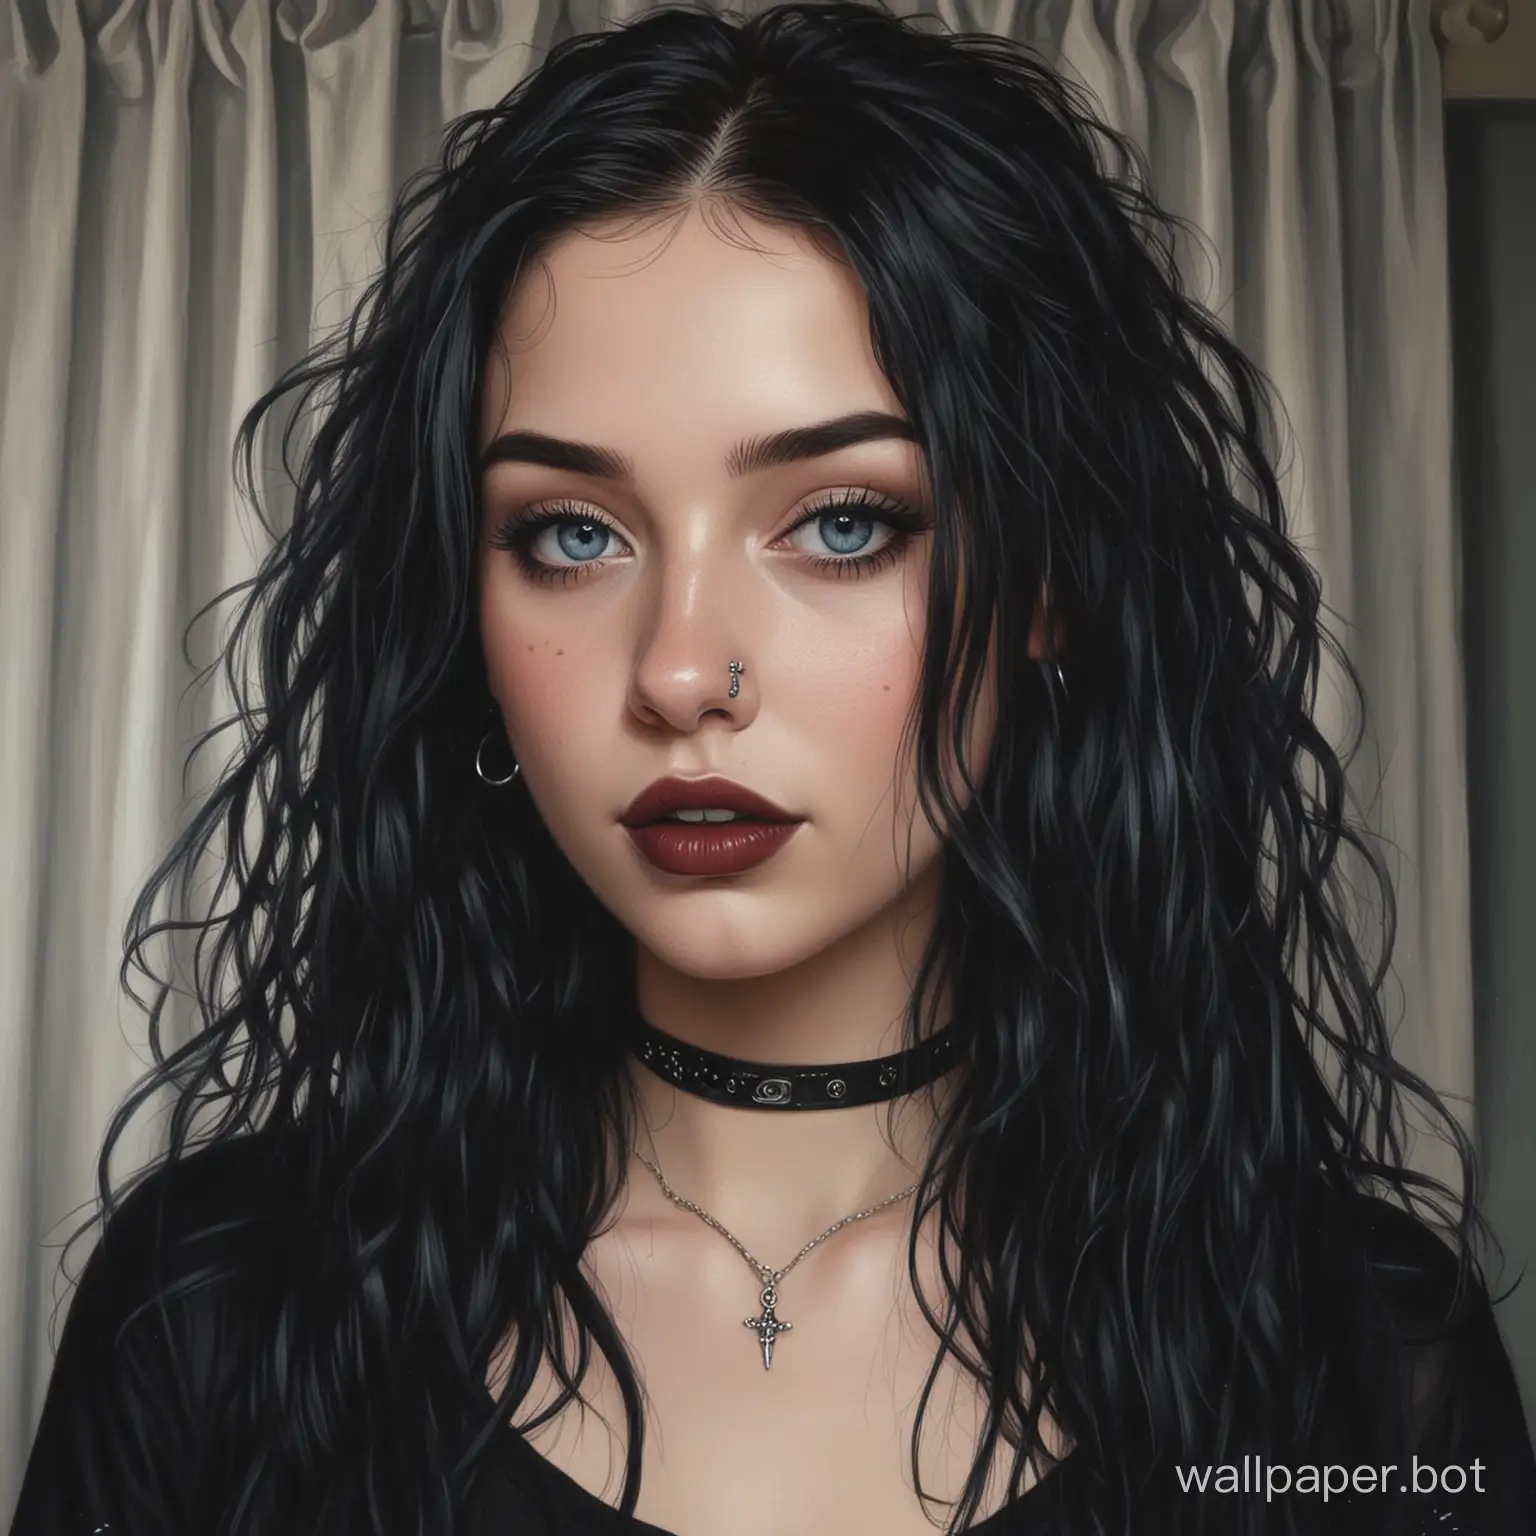 painting of a beautiful 18 year old goth girl, she has nose piercings, big nose ring, nose jewelry, septum piercing, wearing black lipstick, she is pretty, she has blue eyes, she has pale skin, she has lots of freckles, black lips, she has long jet-black hair that is wavy and parted in the middle and falls in curtains, she has a beautiful innocent face, smiling, beaming, very cute, perfect, sense of wonder, Velazquez painting style